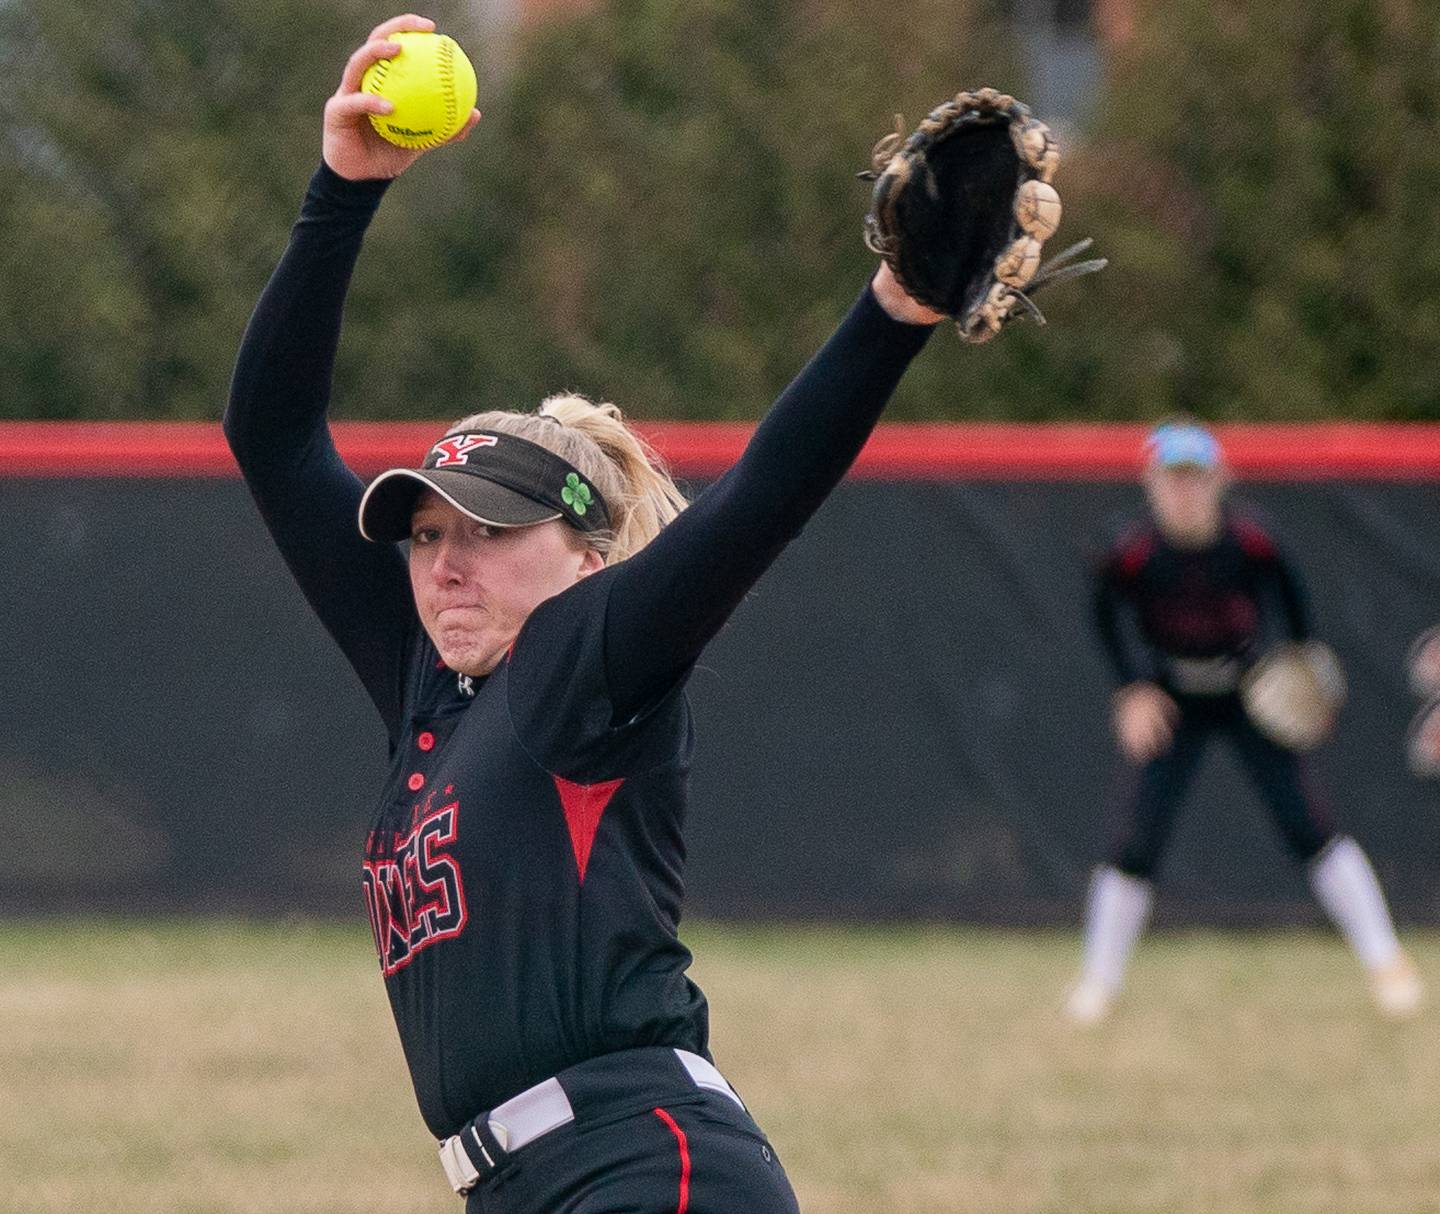 Yorkville's Madi Reeves (2) delivers a pitch against Neuqua Valley during a softball game at Yorkville High School on Wednesday, April 6, 2022.